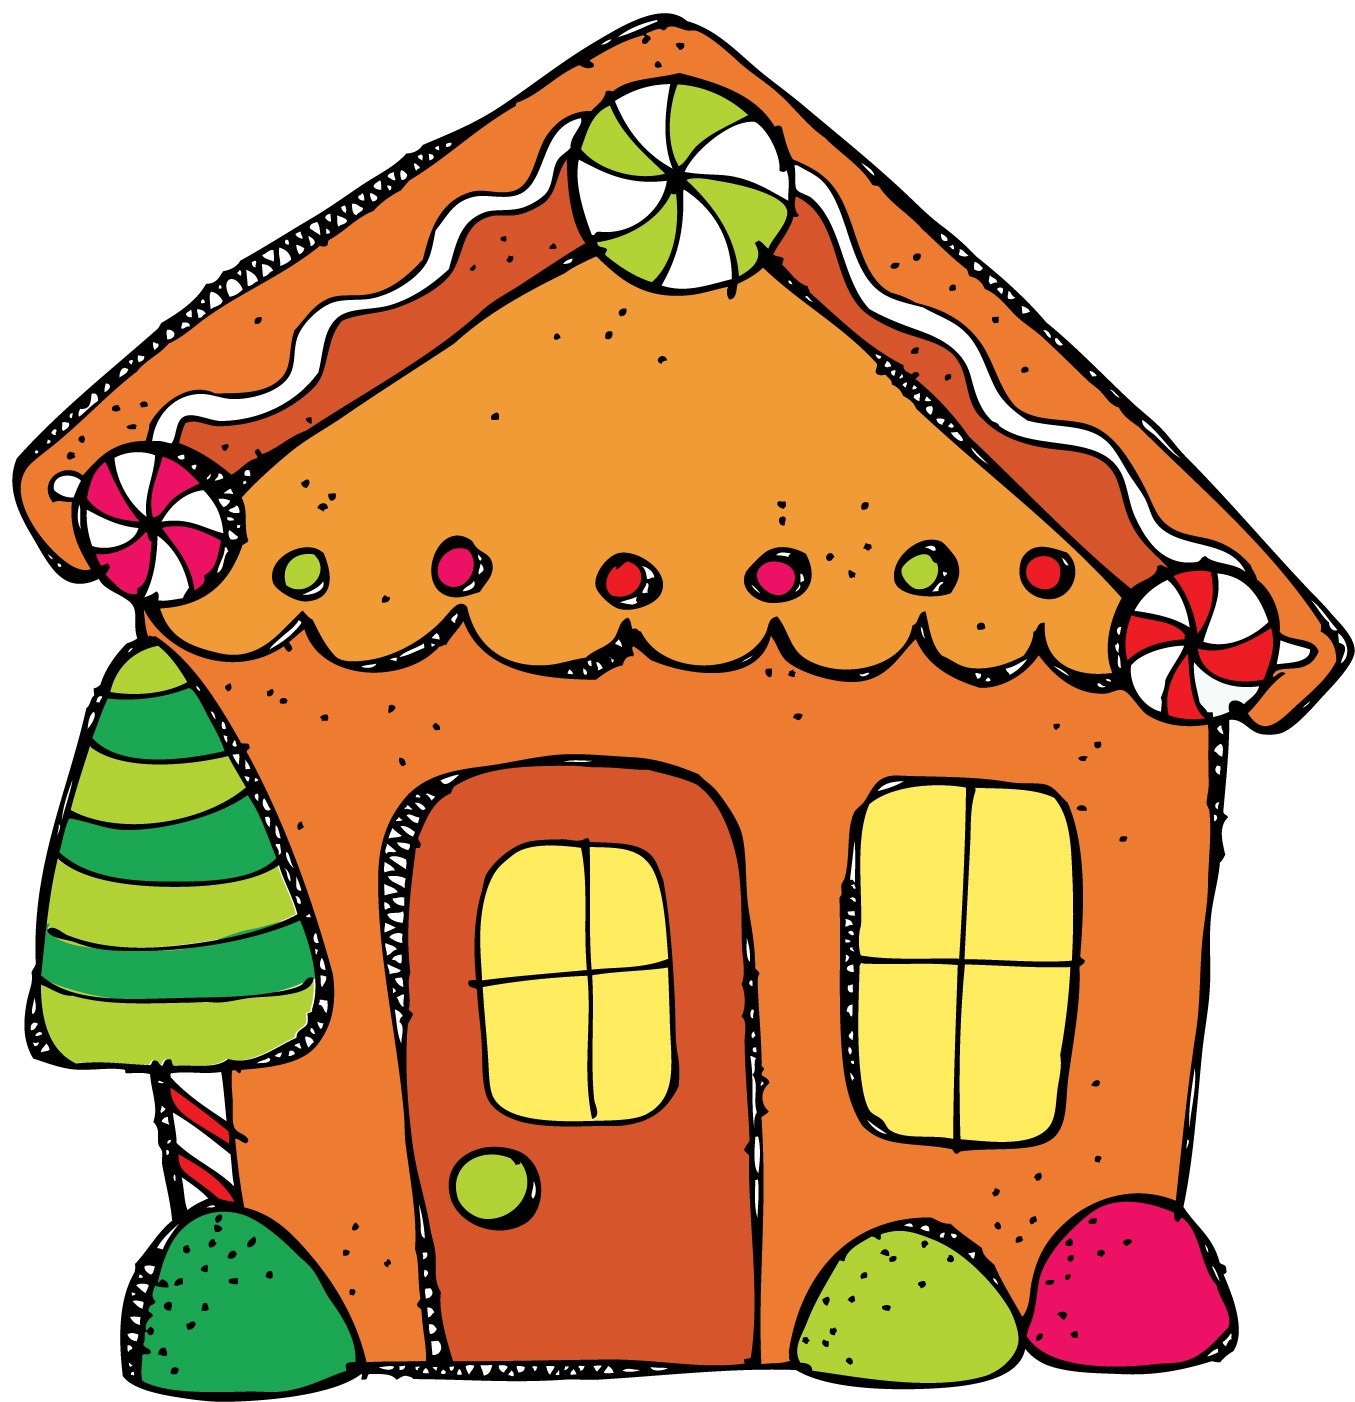 Drawing christmas house free image download